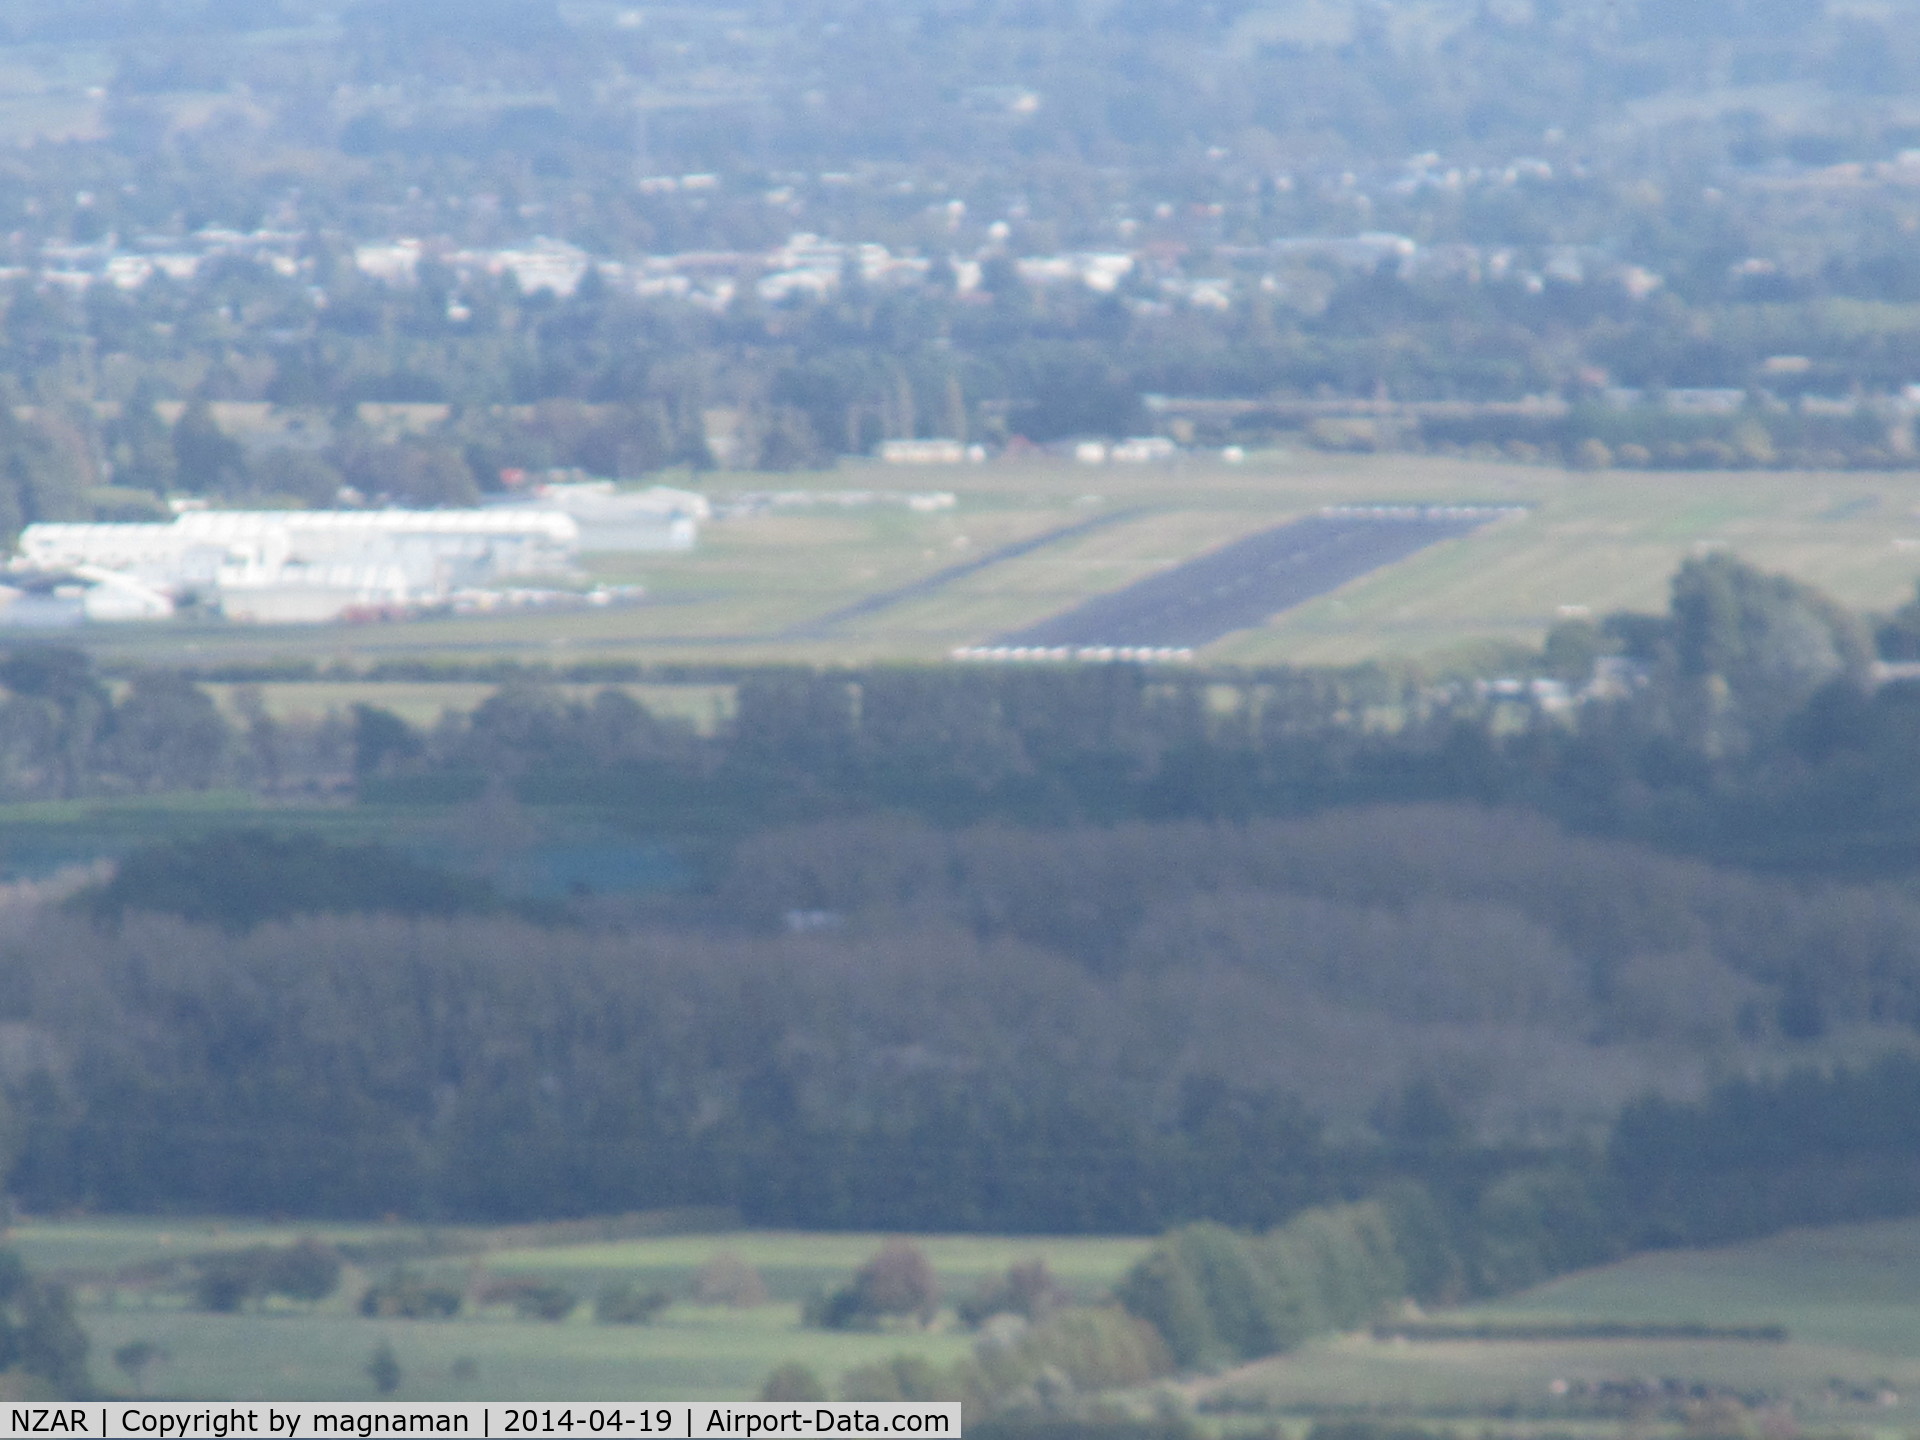 Ardmore Airport, Auckland New Zealand (NZAR) - Viewed from top of clevedon reserve about 10k south